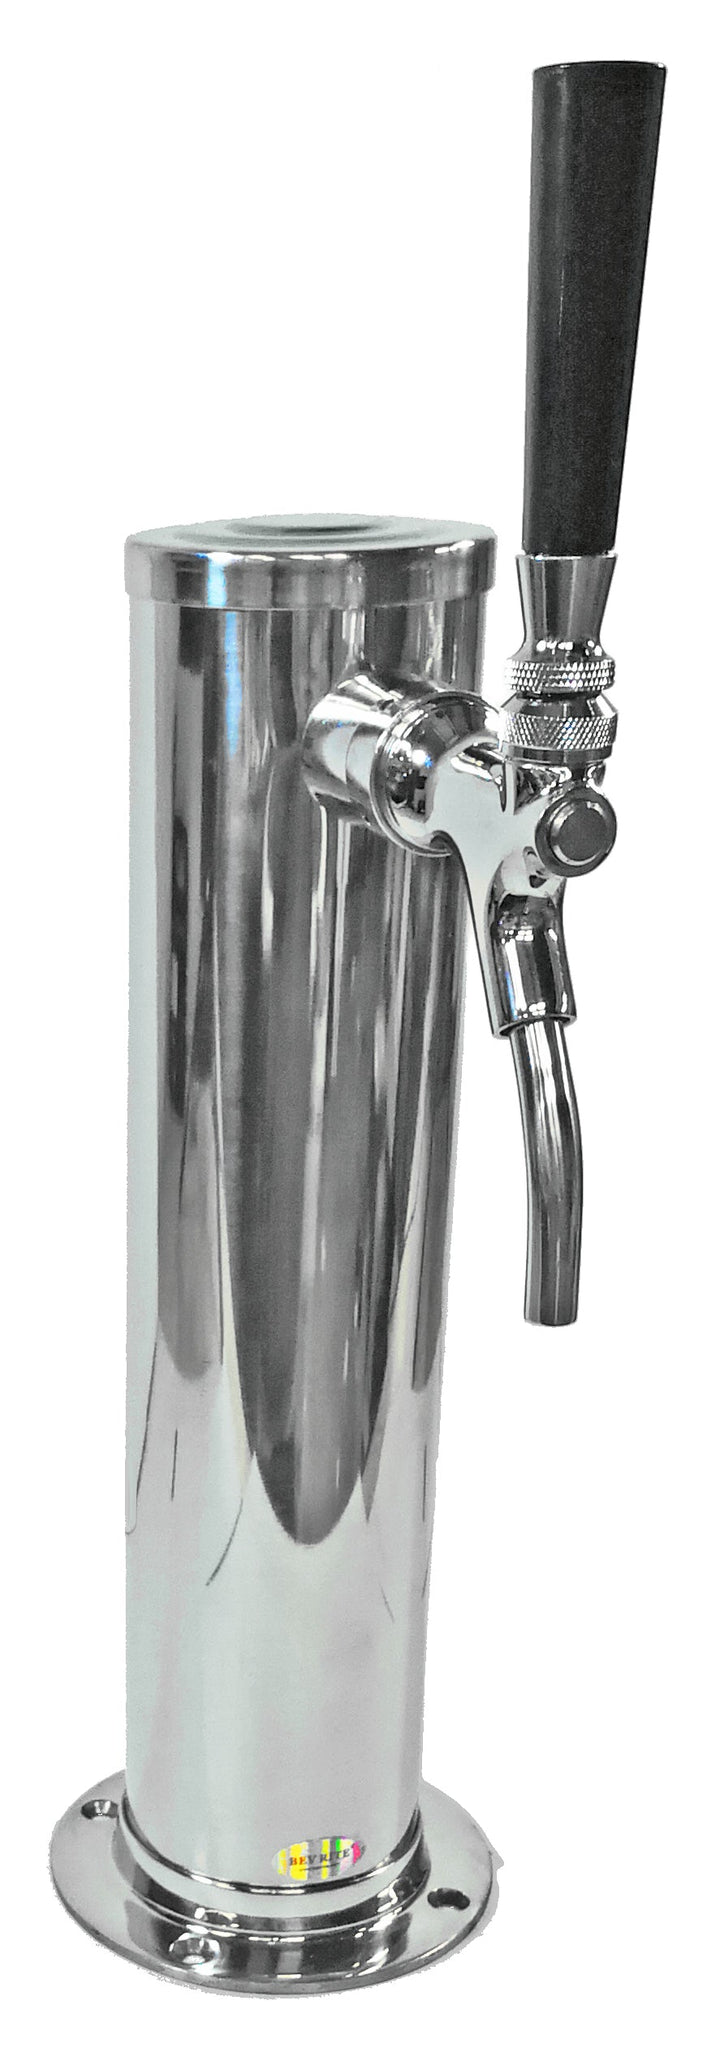 Column Wine Tower, Polished - Select style and number of faucets (1-4 lines) Draft Warehouse